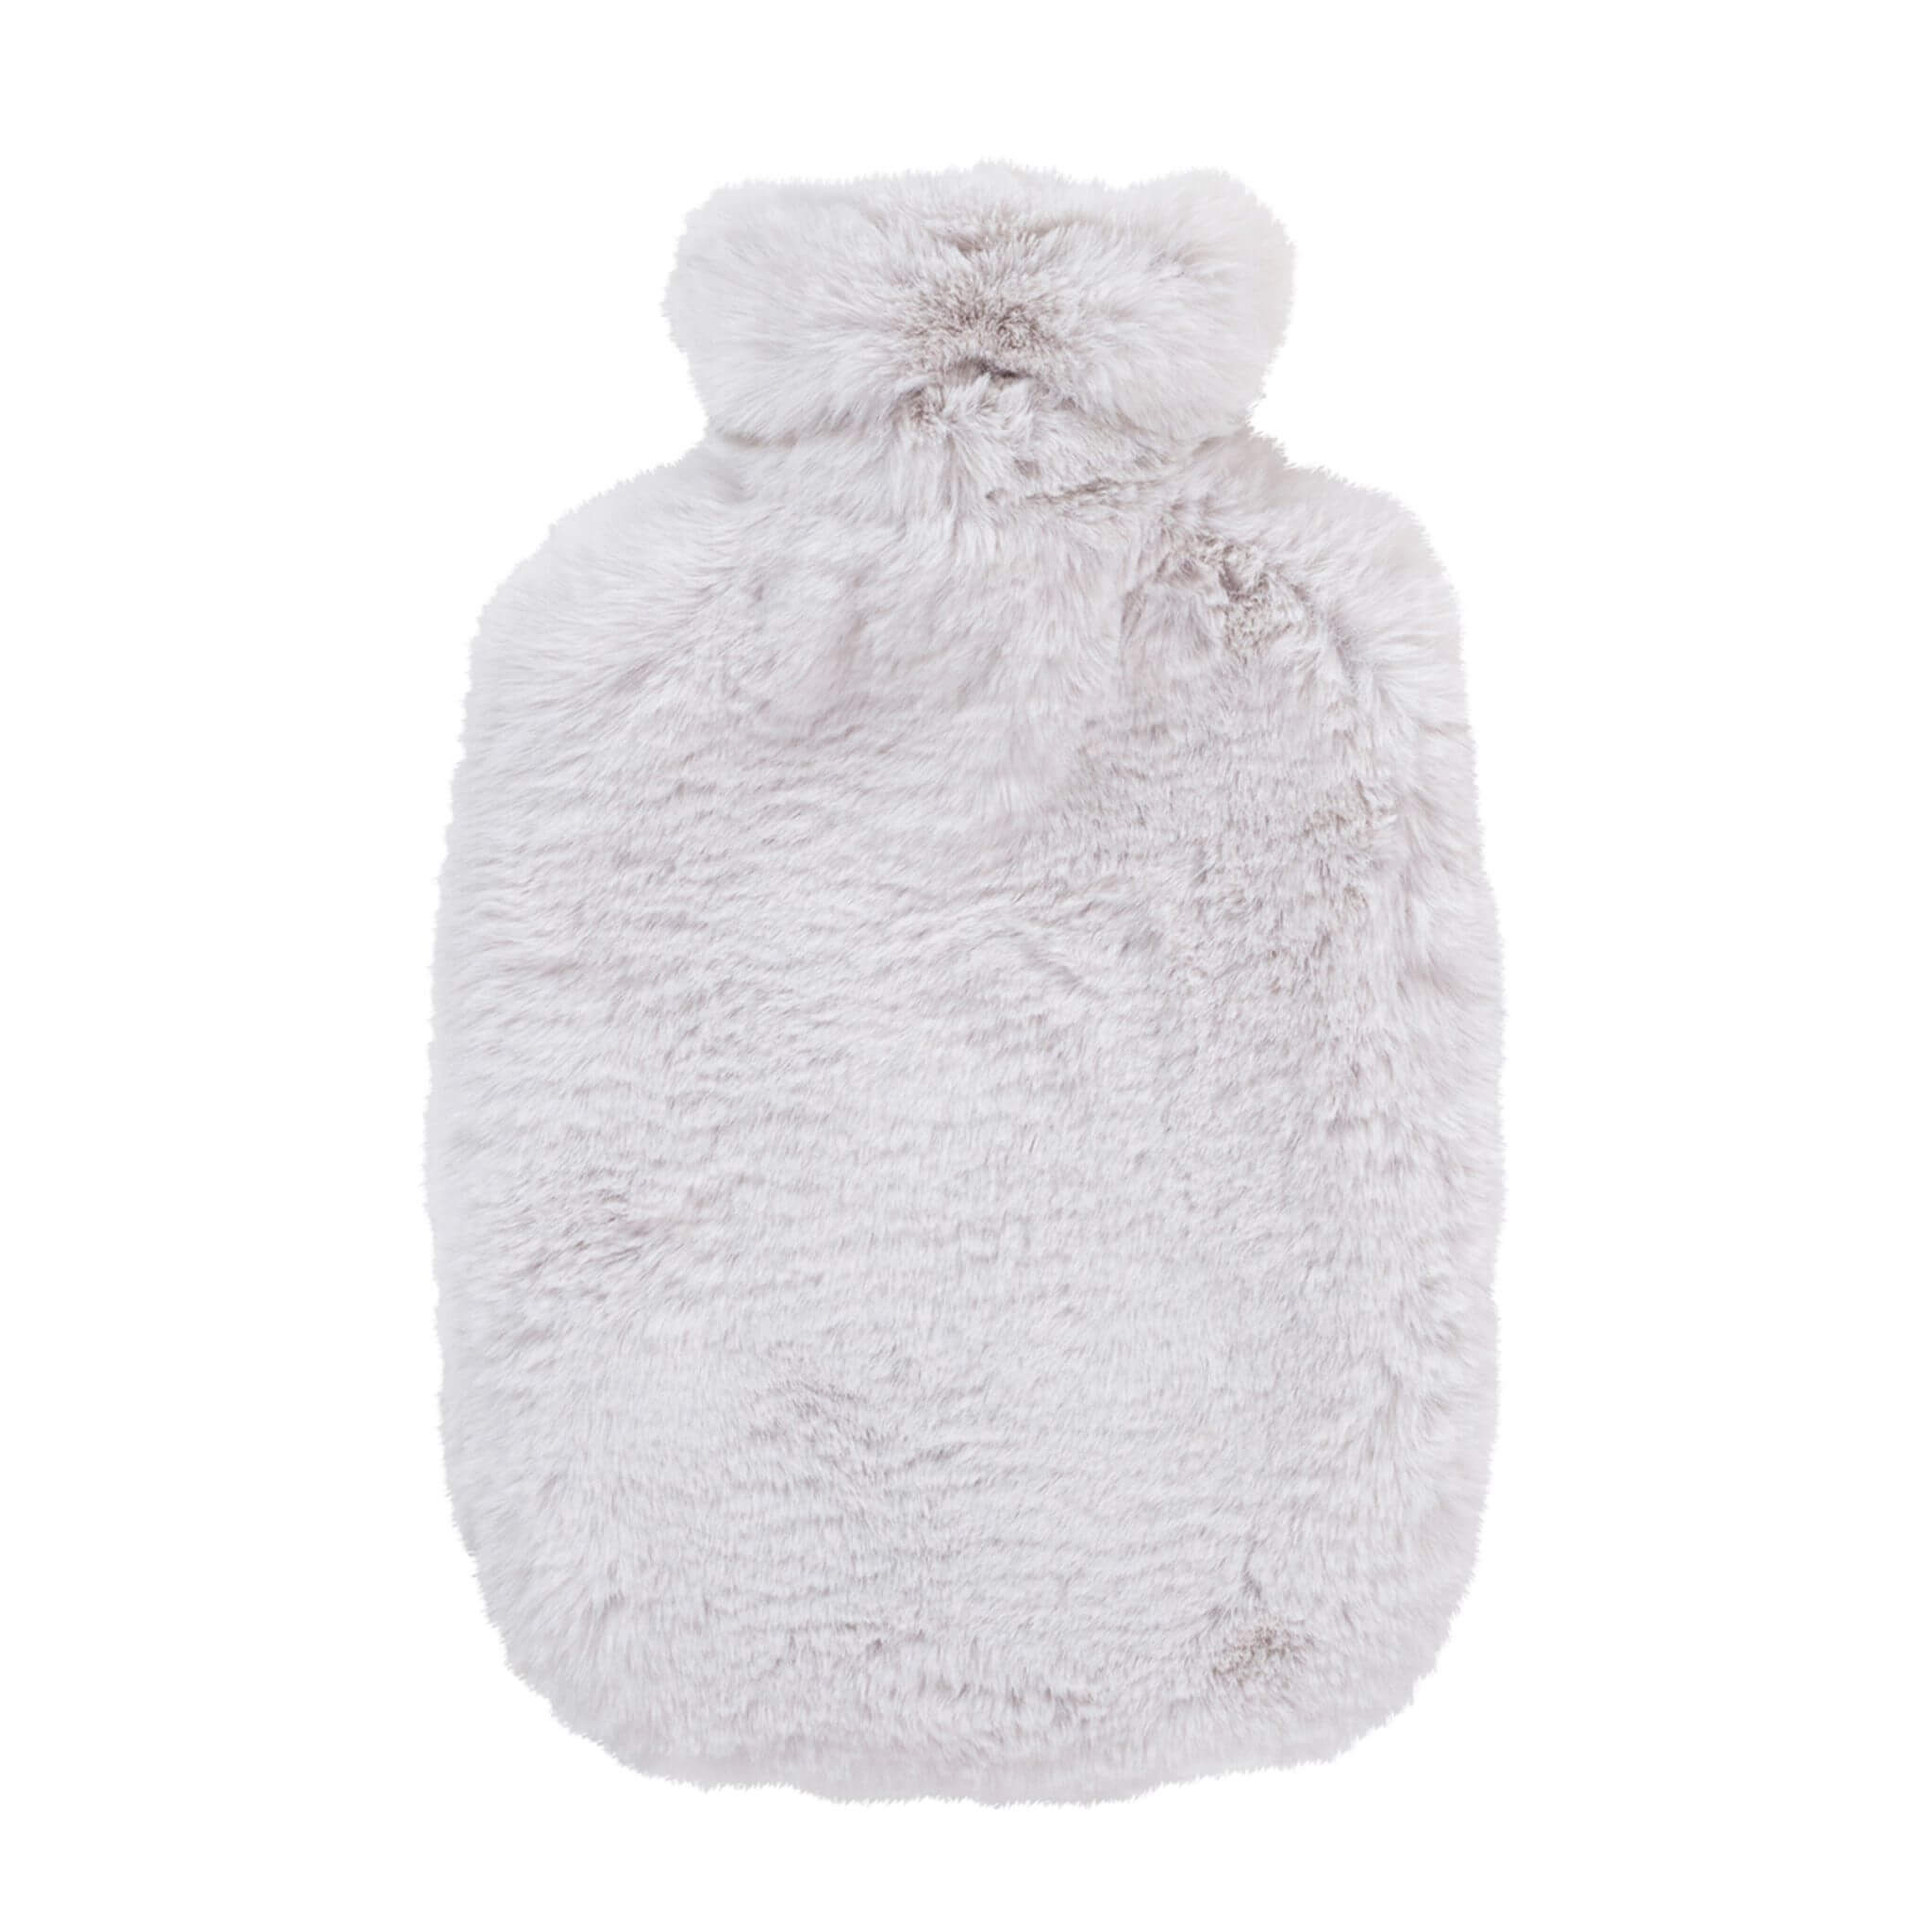 2 Litre Fashy Hot Water Bottle with Ice Grey Extra Soft Plush Cover